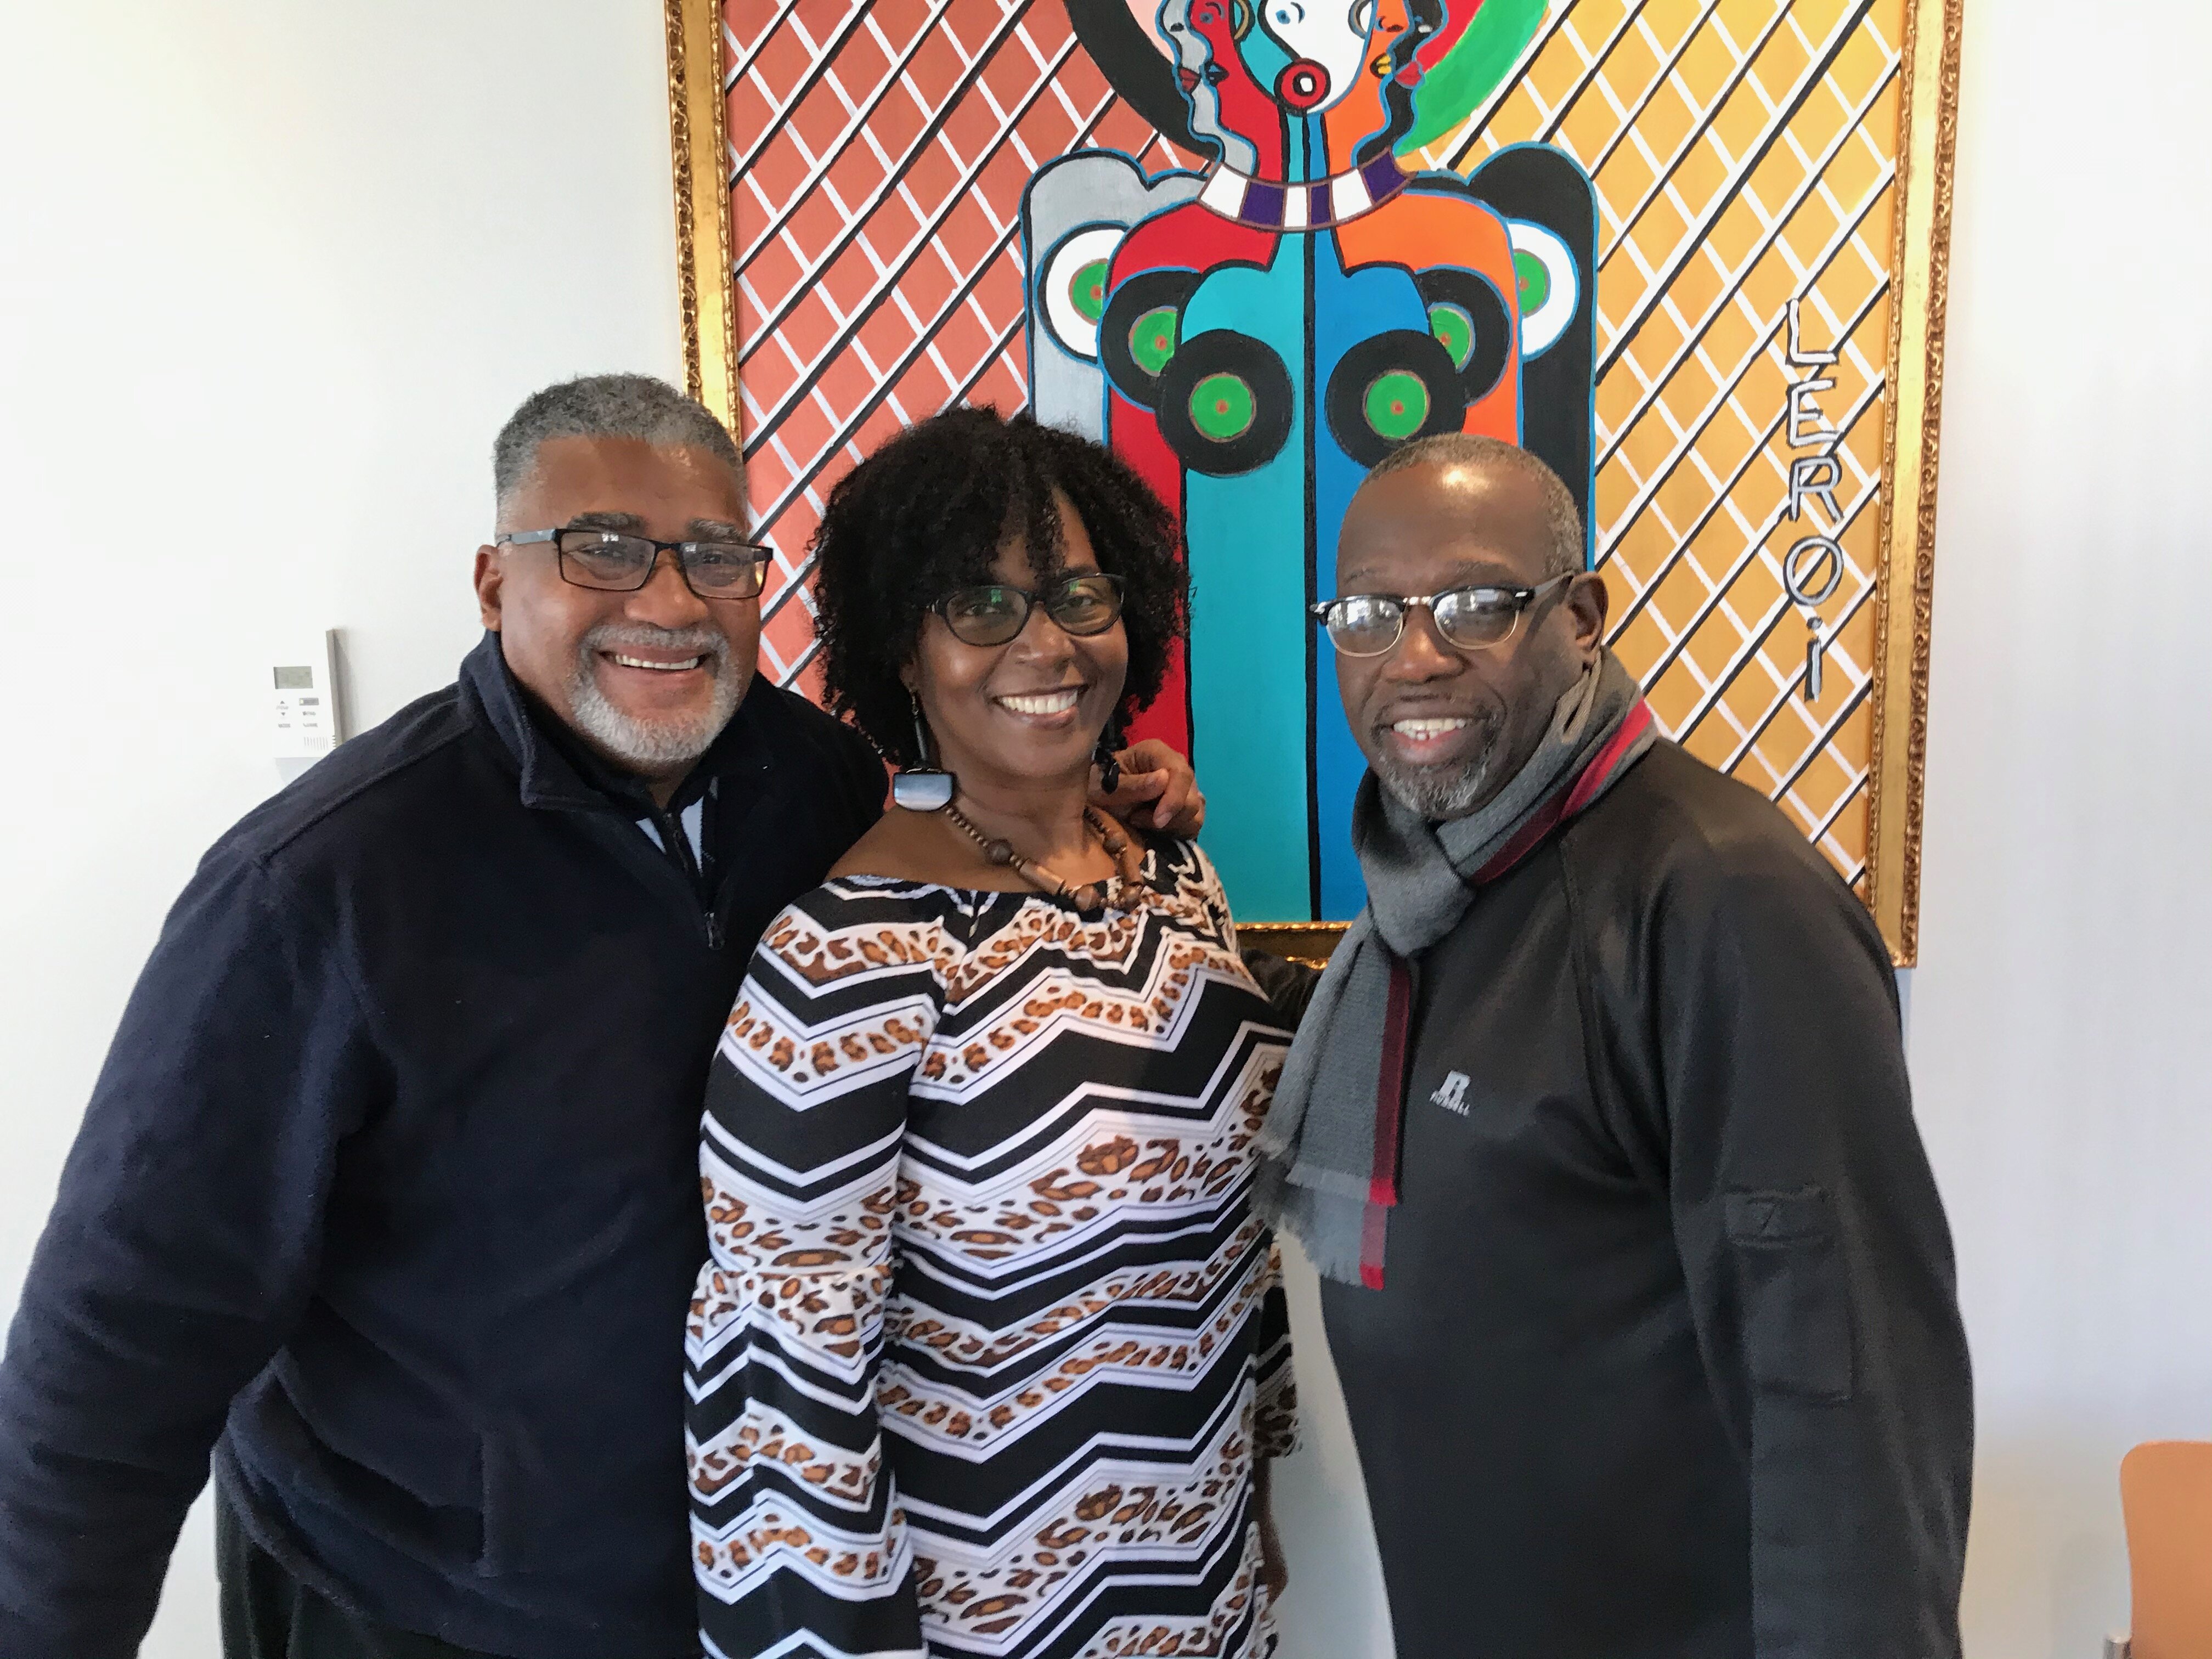 Dale Holt, Tina Grant-Holt and Reginald Ingram, in front of a lively painting by local artist LeRoi Johnson